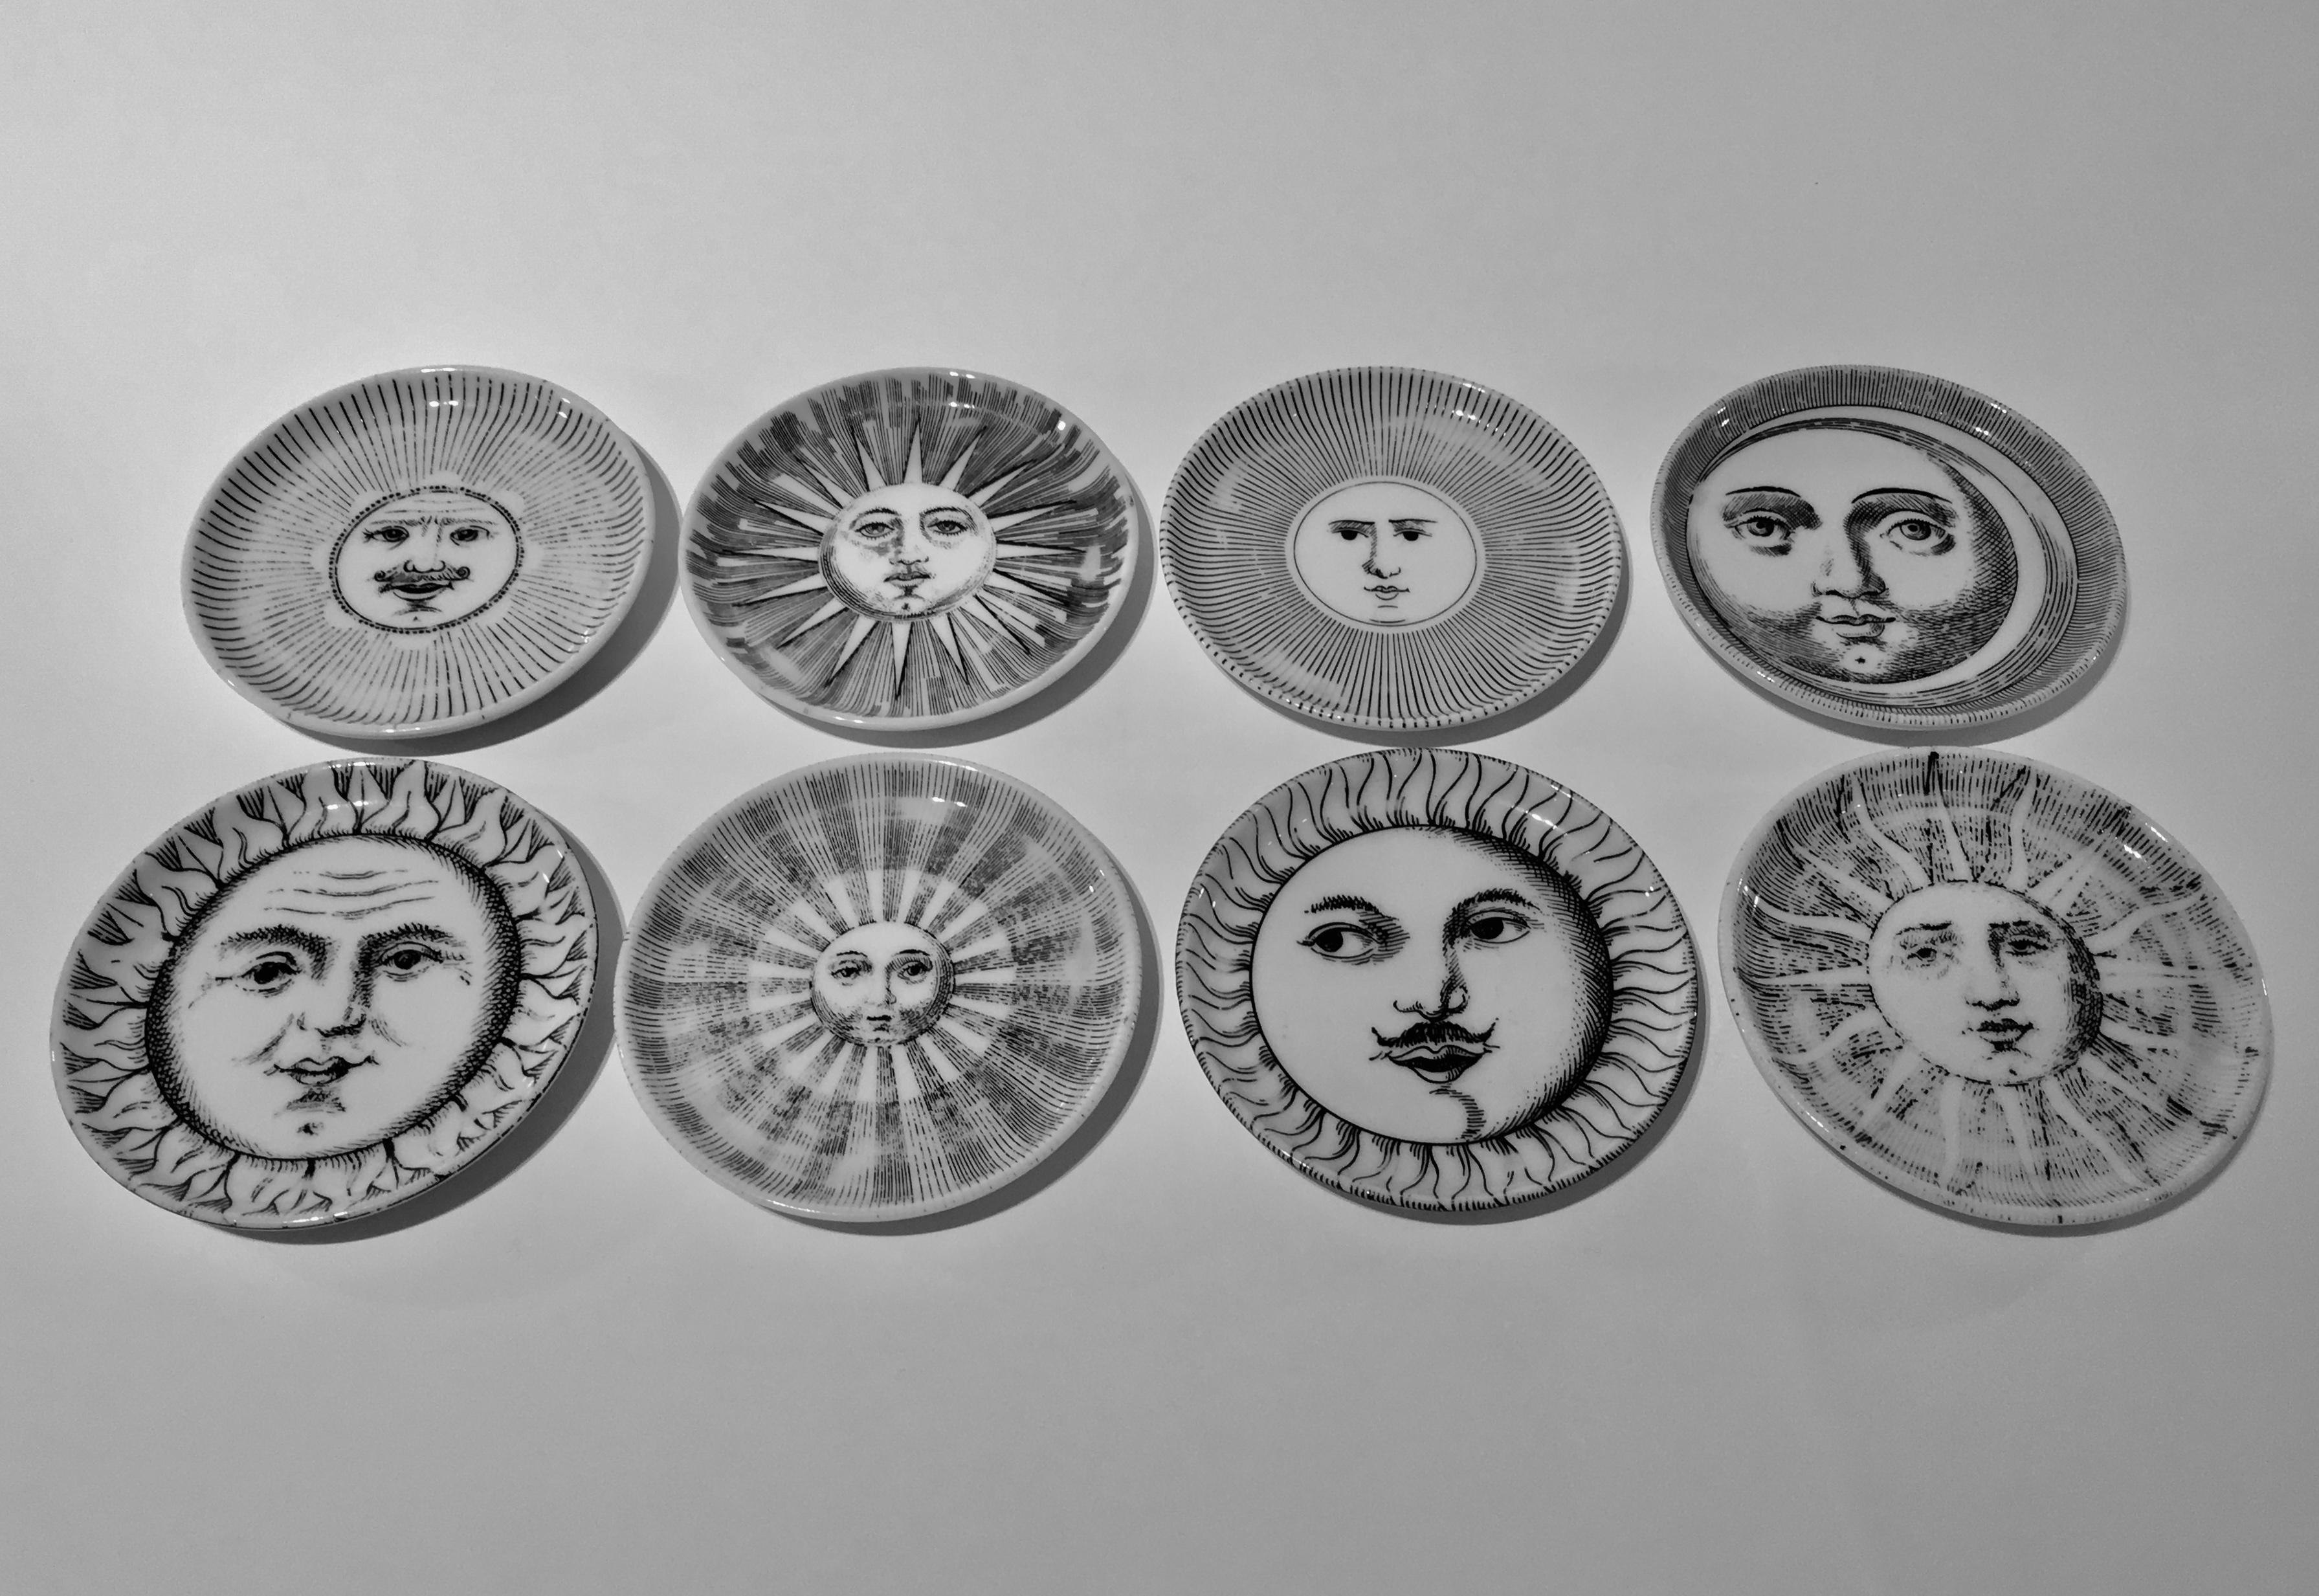 A complete set of 1960s ceramic drinks coasters designed by Piero Fornasetti, Italy, circa 1960. This design, titled 'Soli e Lune' or Sun and Moon is one of Piero's most popular and striking motifs and depicts eight faces... four solar and four